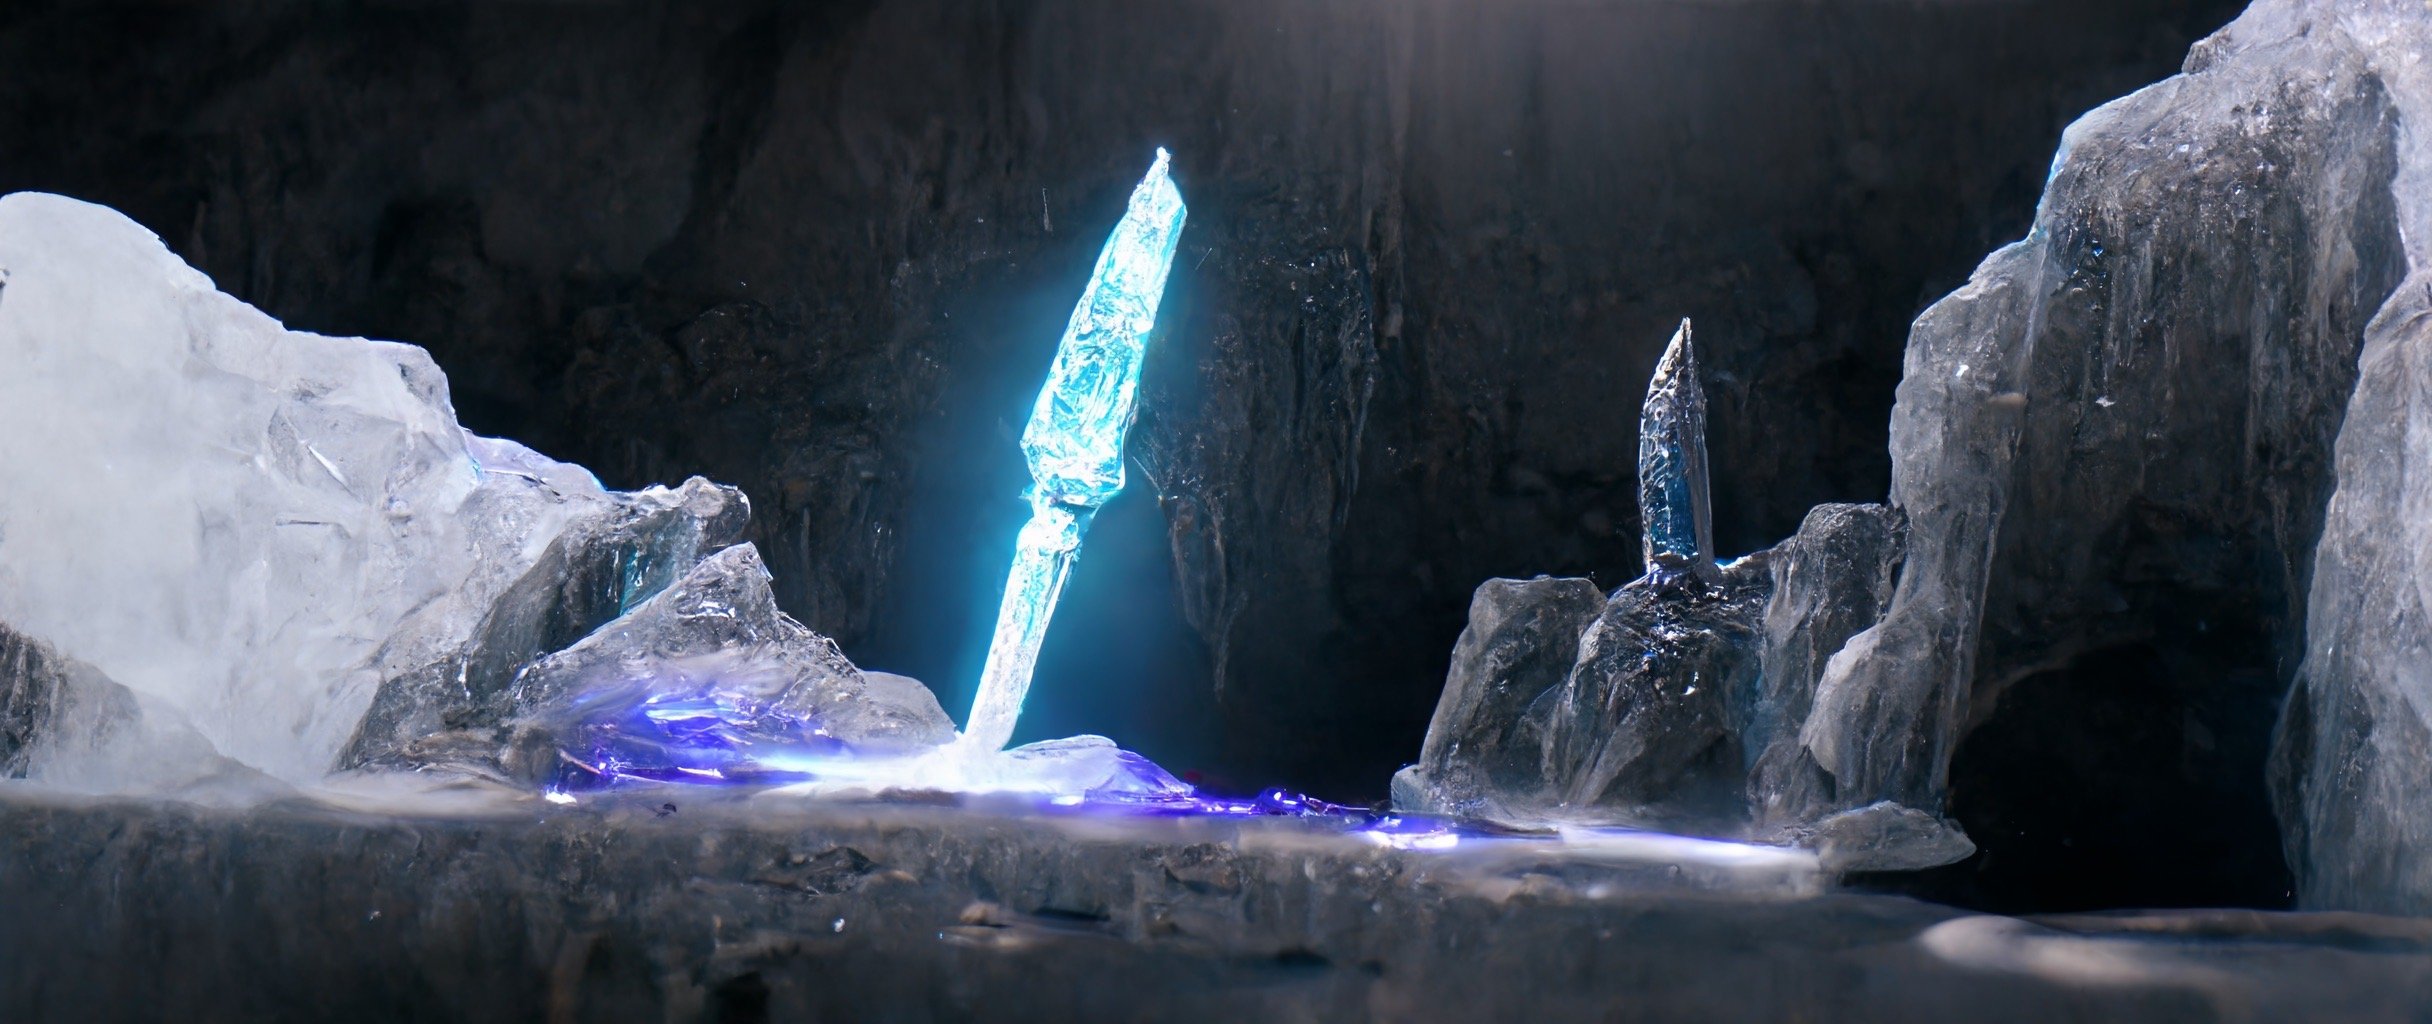 889bc416-4916-47eb-b393-fadf225c2c21_S3RAPH_frozen_sword_in_ice_cave_with_reflective_crystals._epic_lava_falls._8k_cinematic_composition_render_.JPG